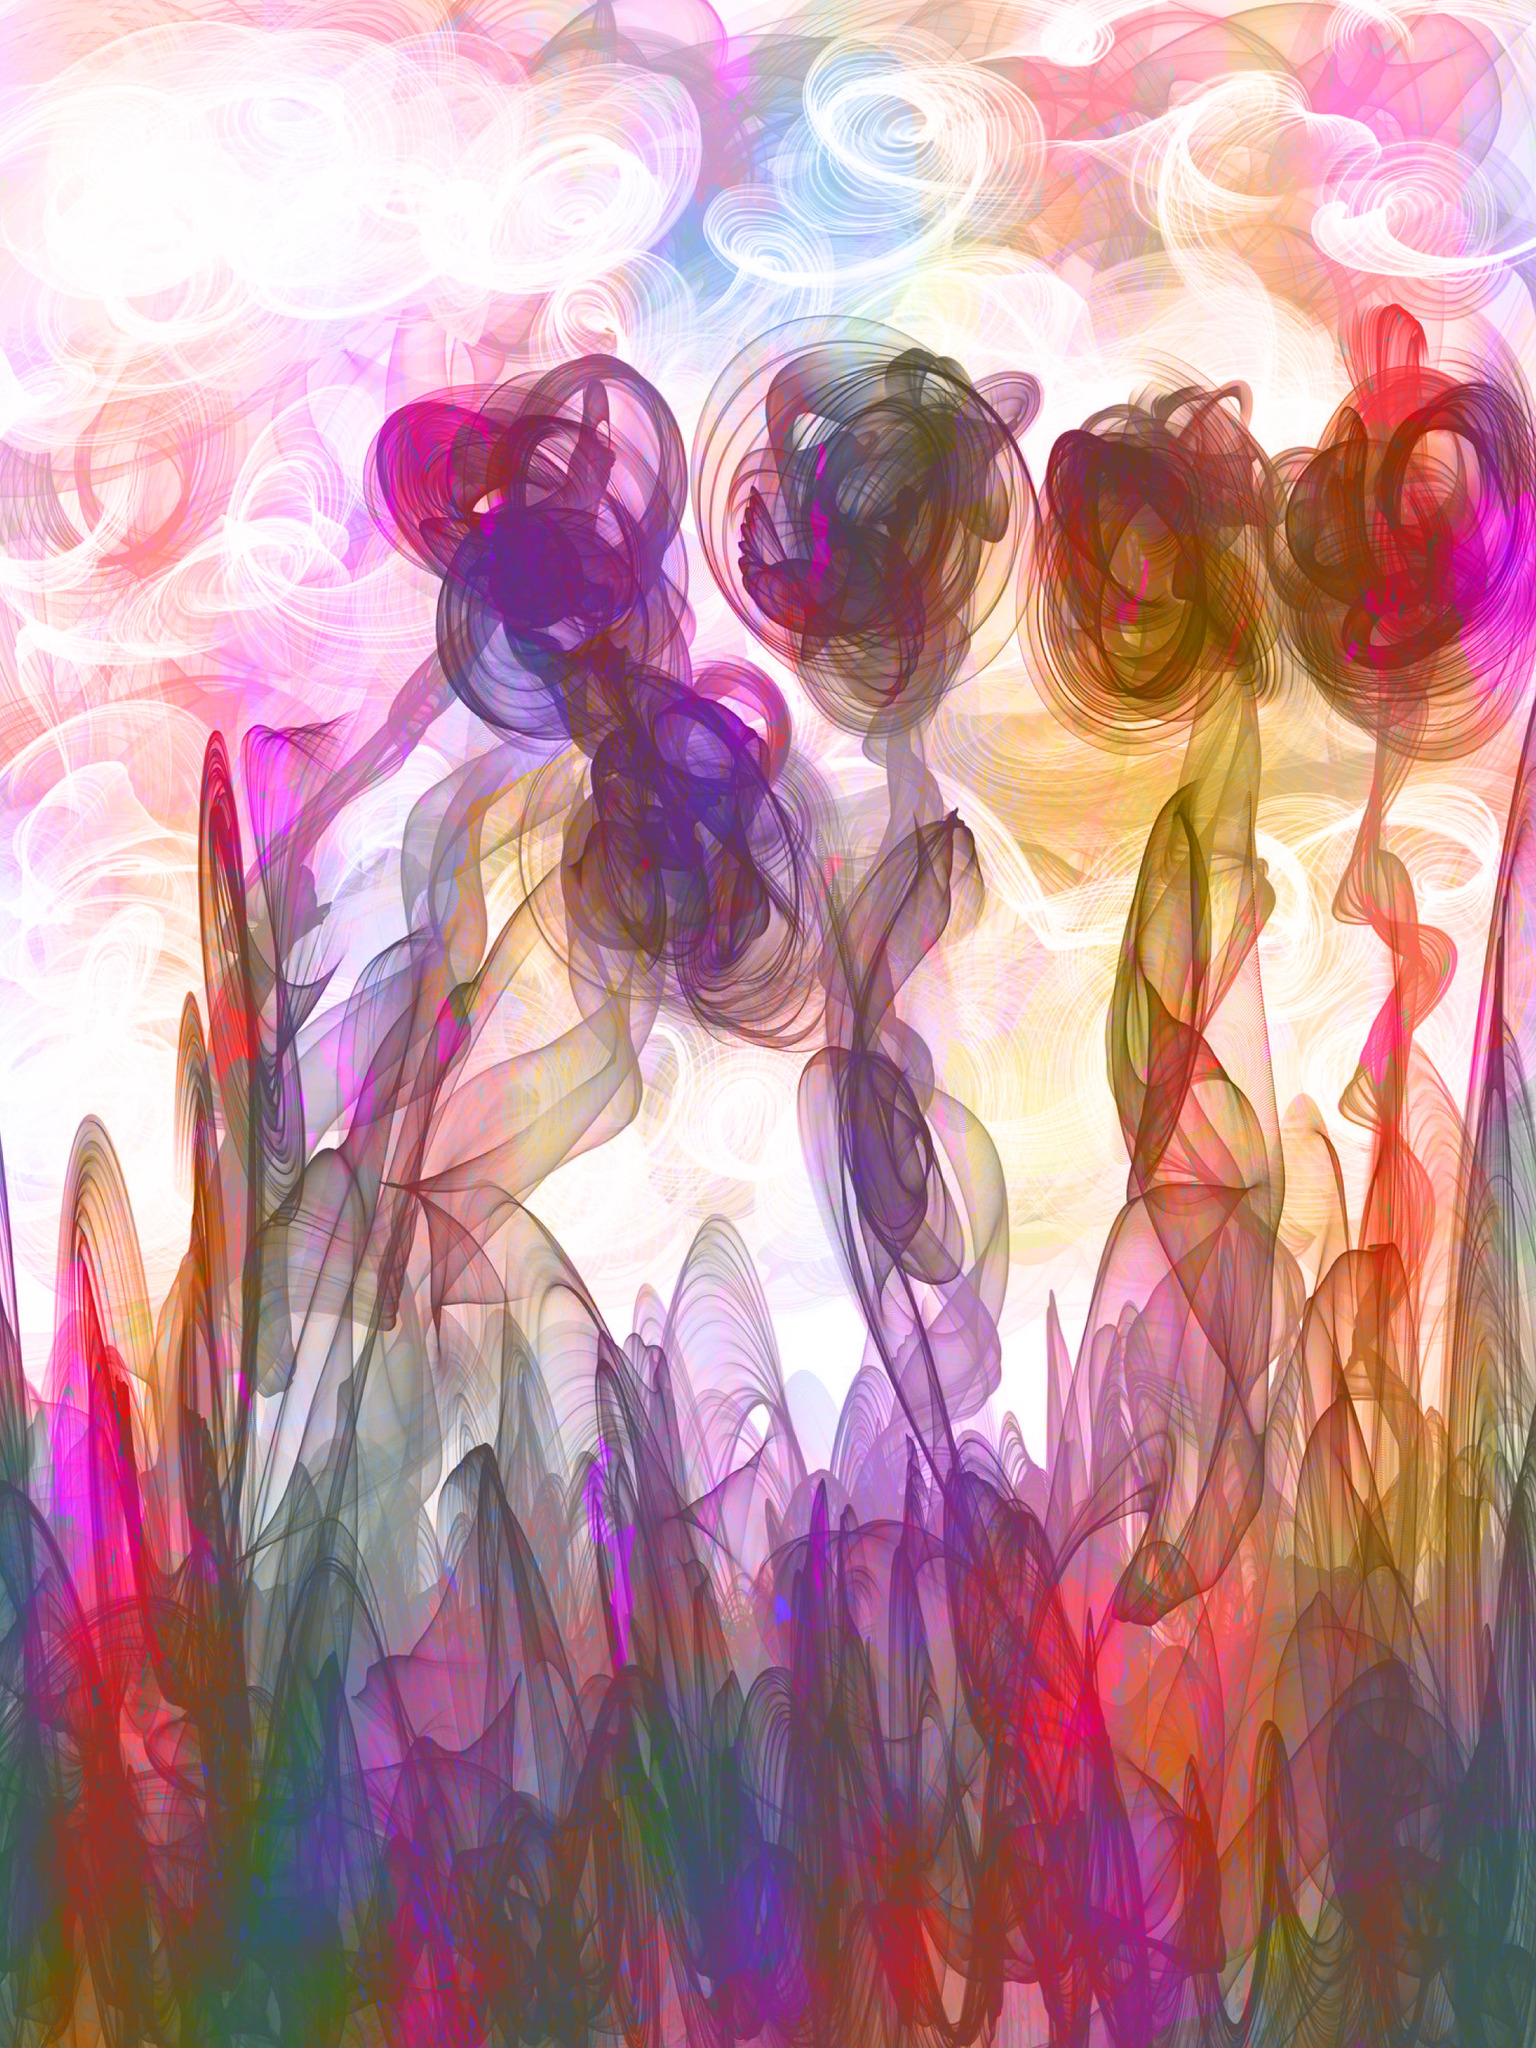 Graphic Art "An abstract world of tulips"